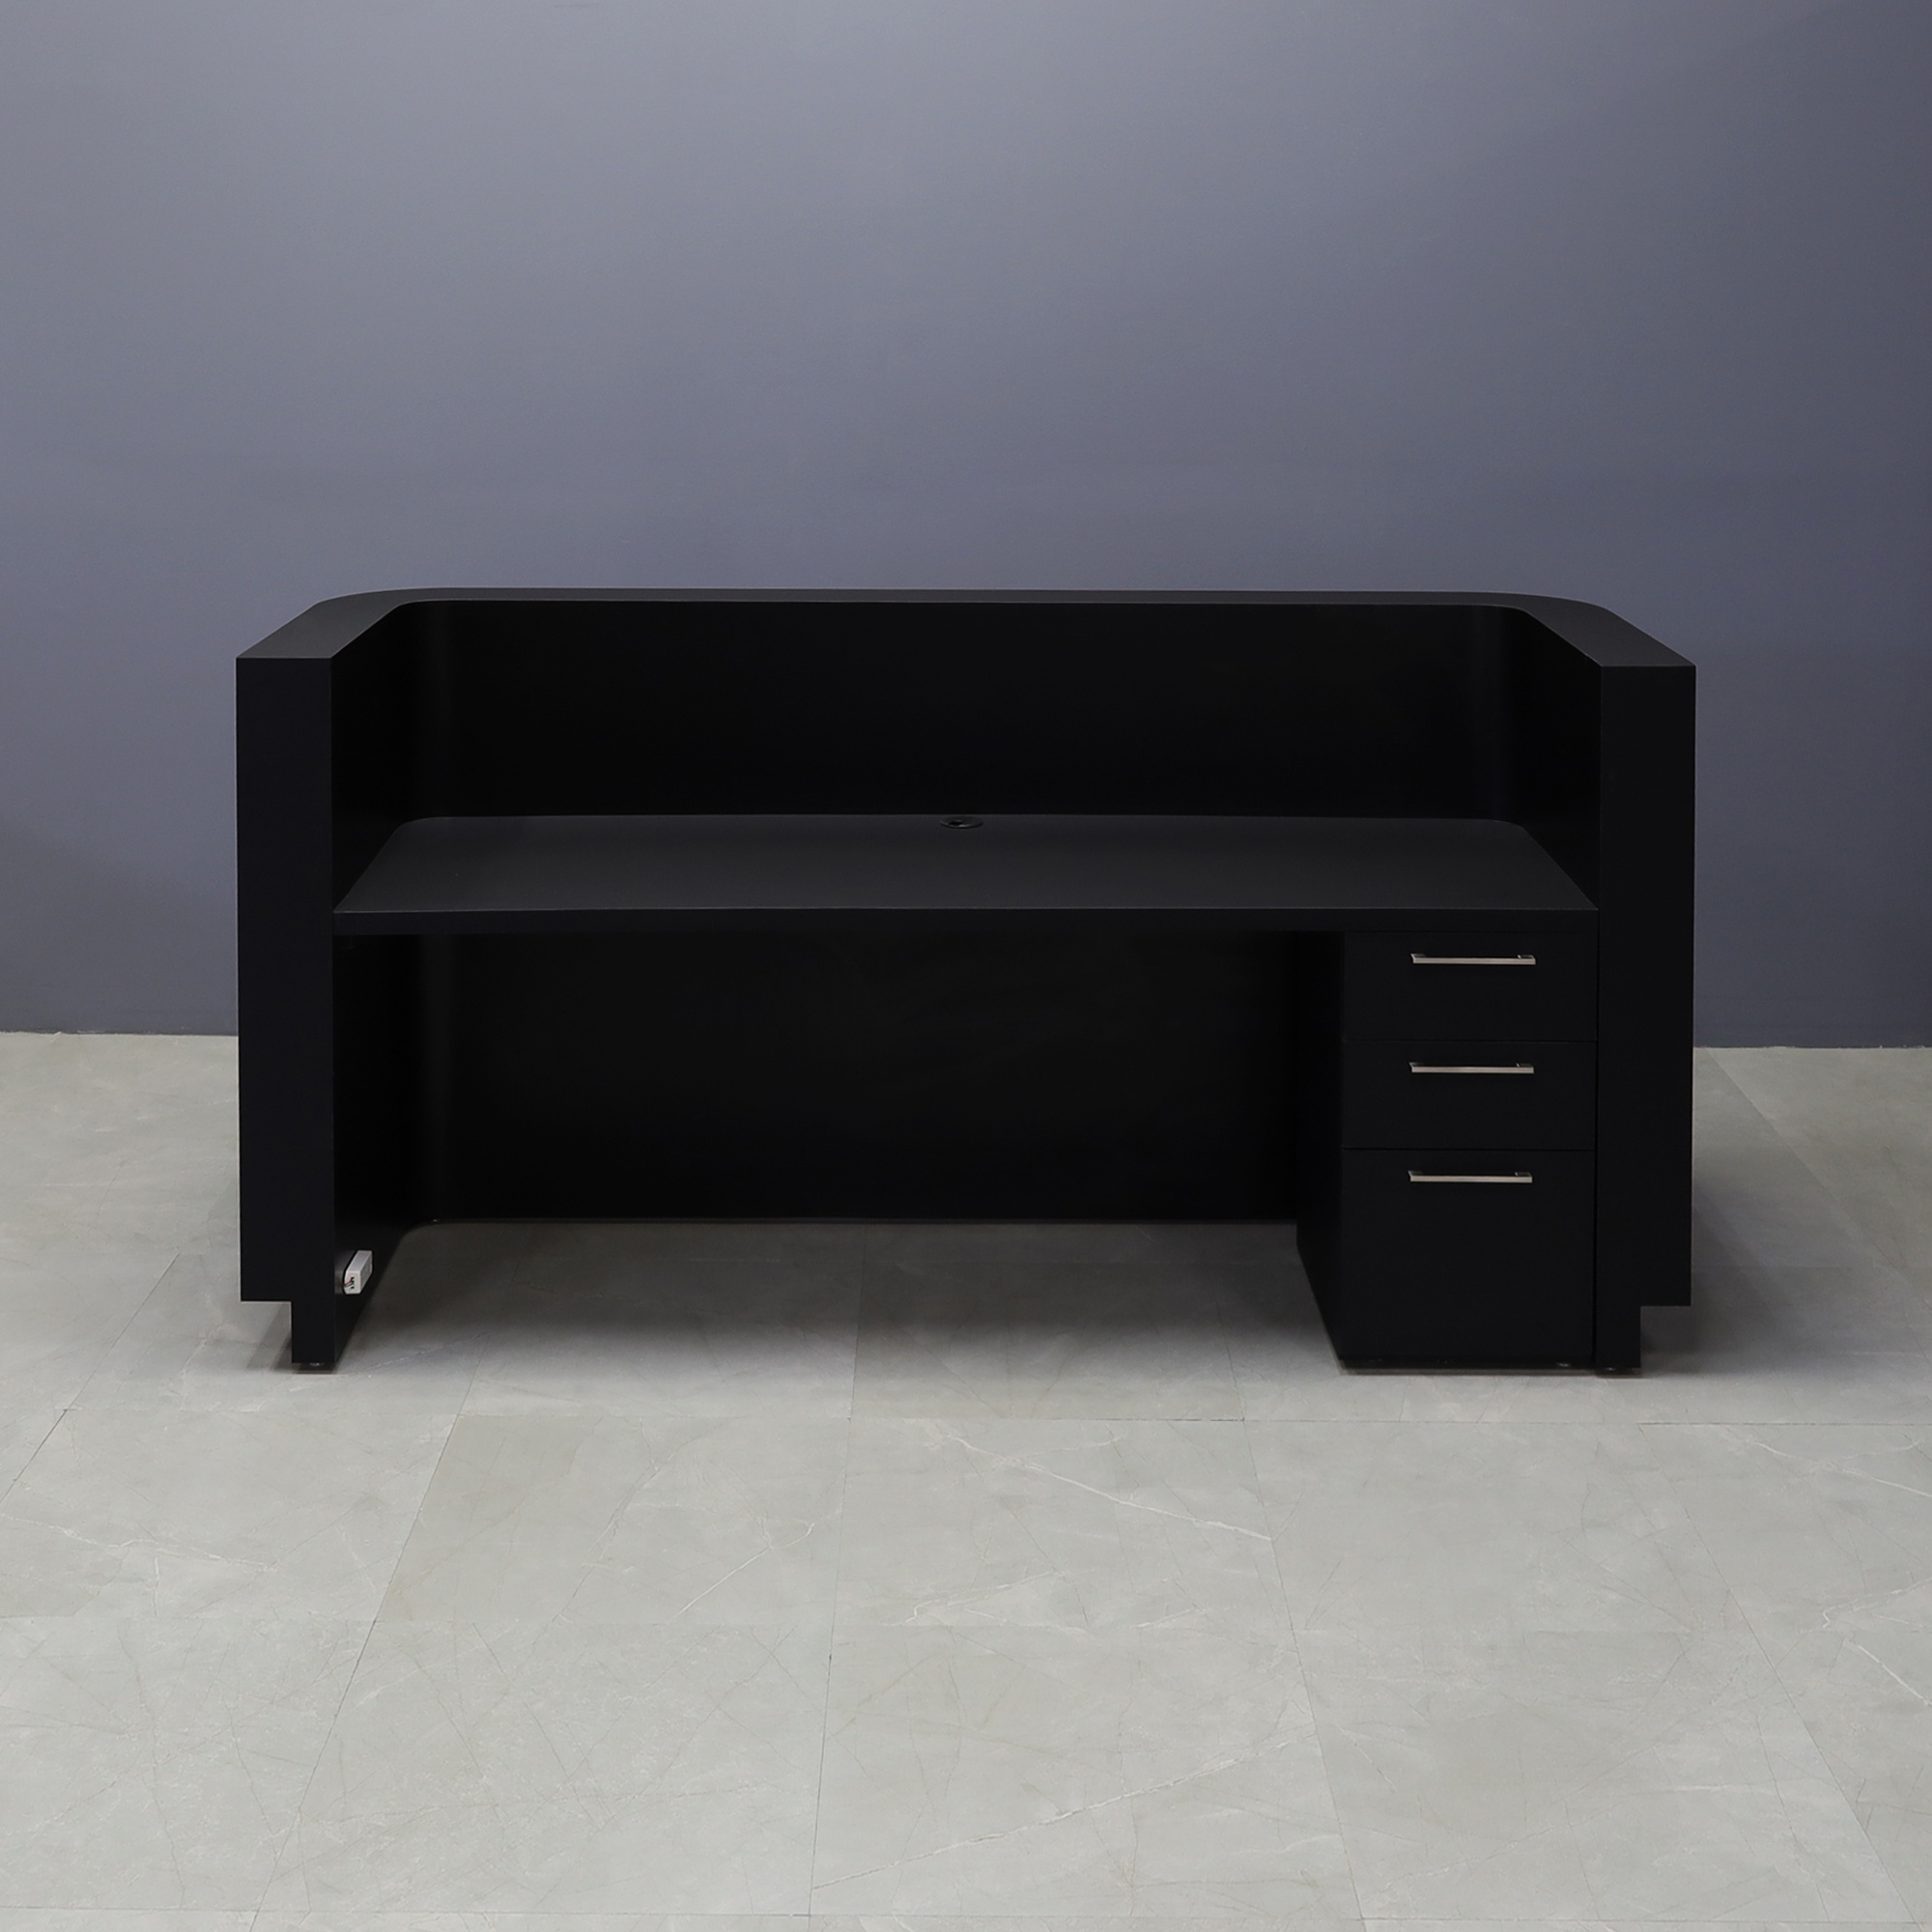 90-inch Nola Custom Reception Desk in black traceless laminate main desk and brushed aluminum toe-kick, with white LED,  and built-in storage on right side when sitting, shown here.